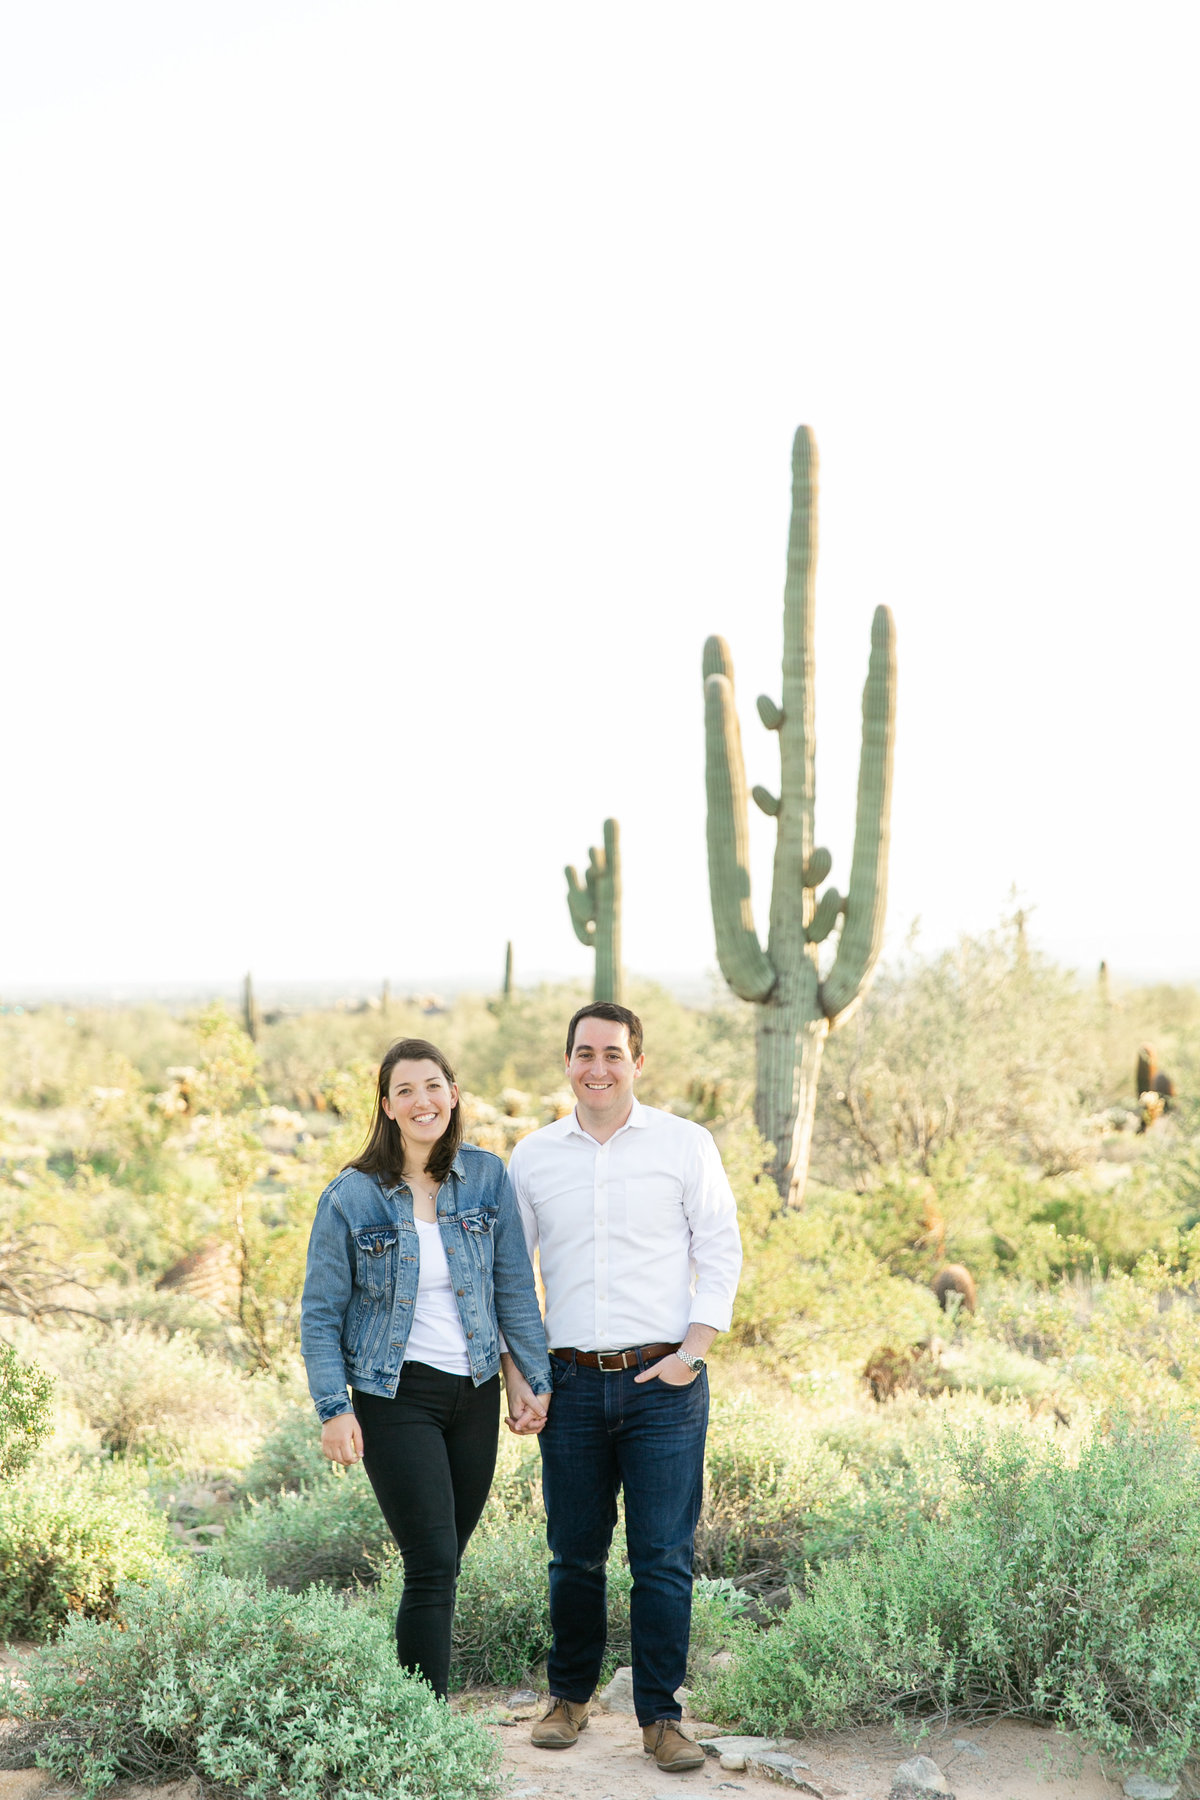 Karlie Colleen Photography - Scottsdale family photography - Victoria & family-214